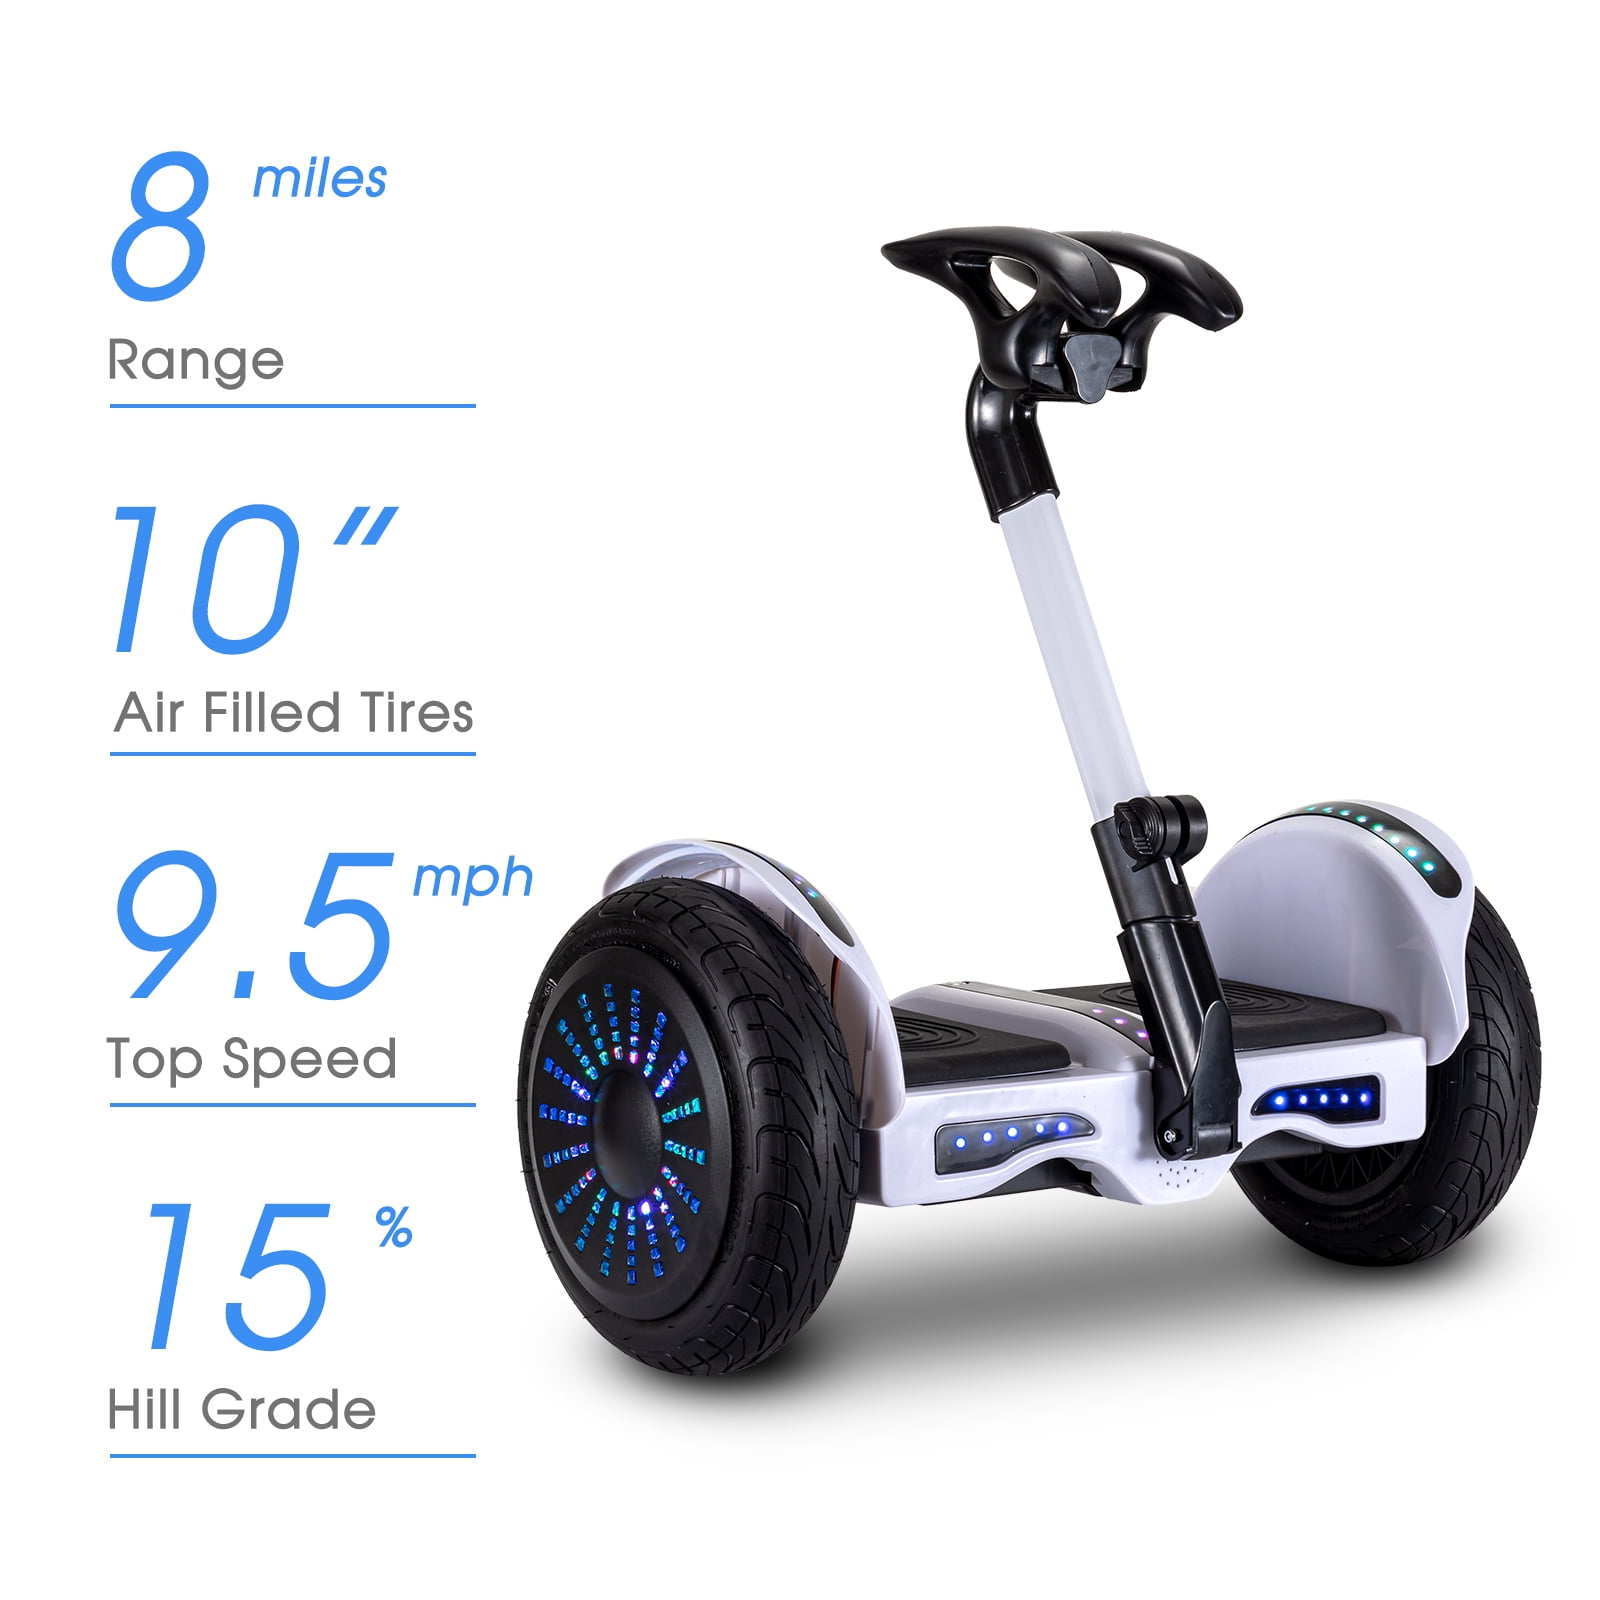 Intelligent Self-Balancing Electric Scooter, 10" Tires, Bluetooth app management, Safer and easier to ride, for teens and adults, Walmart.com